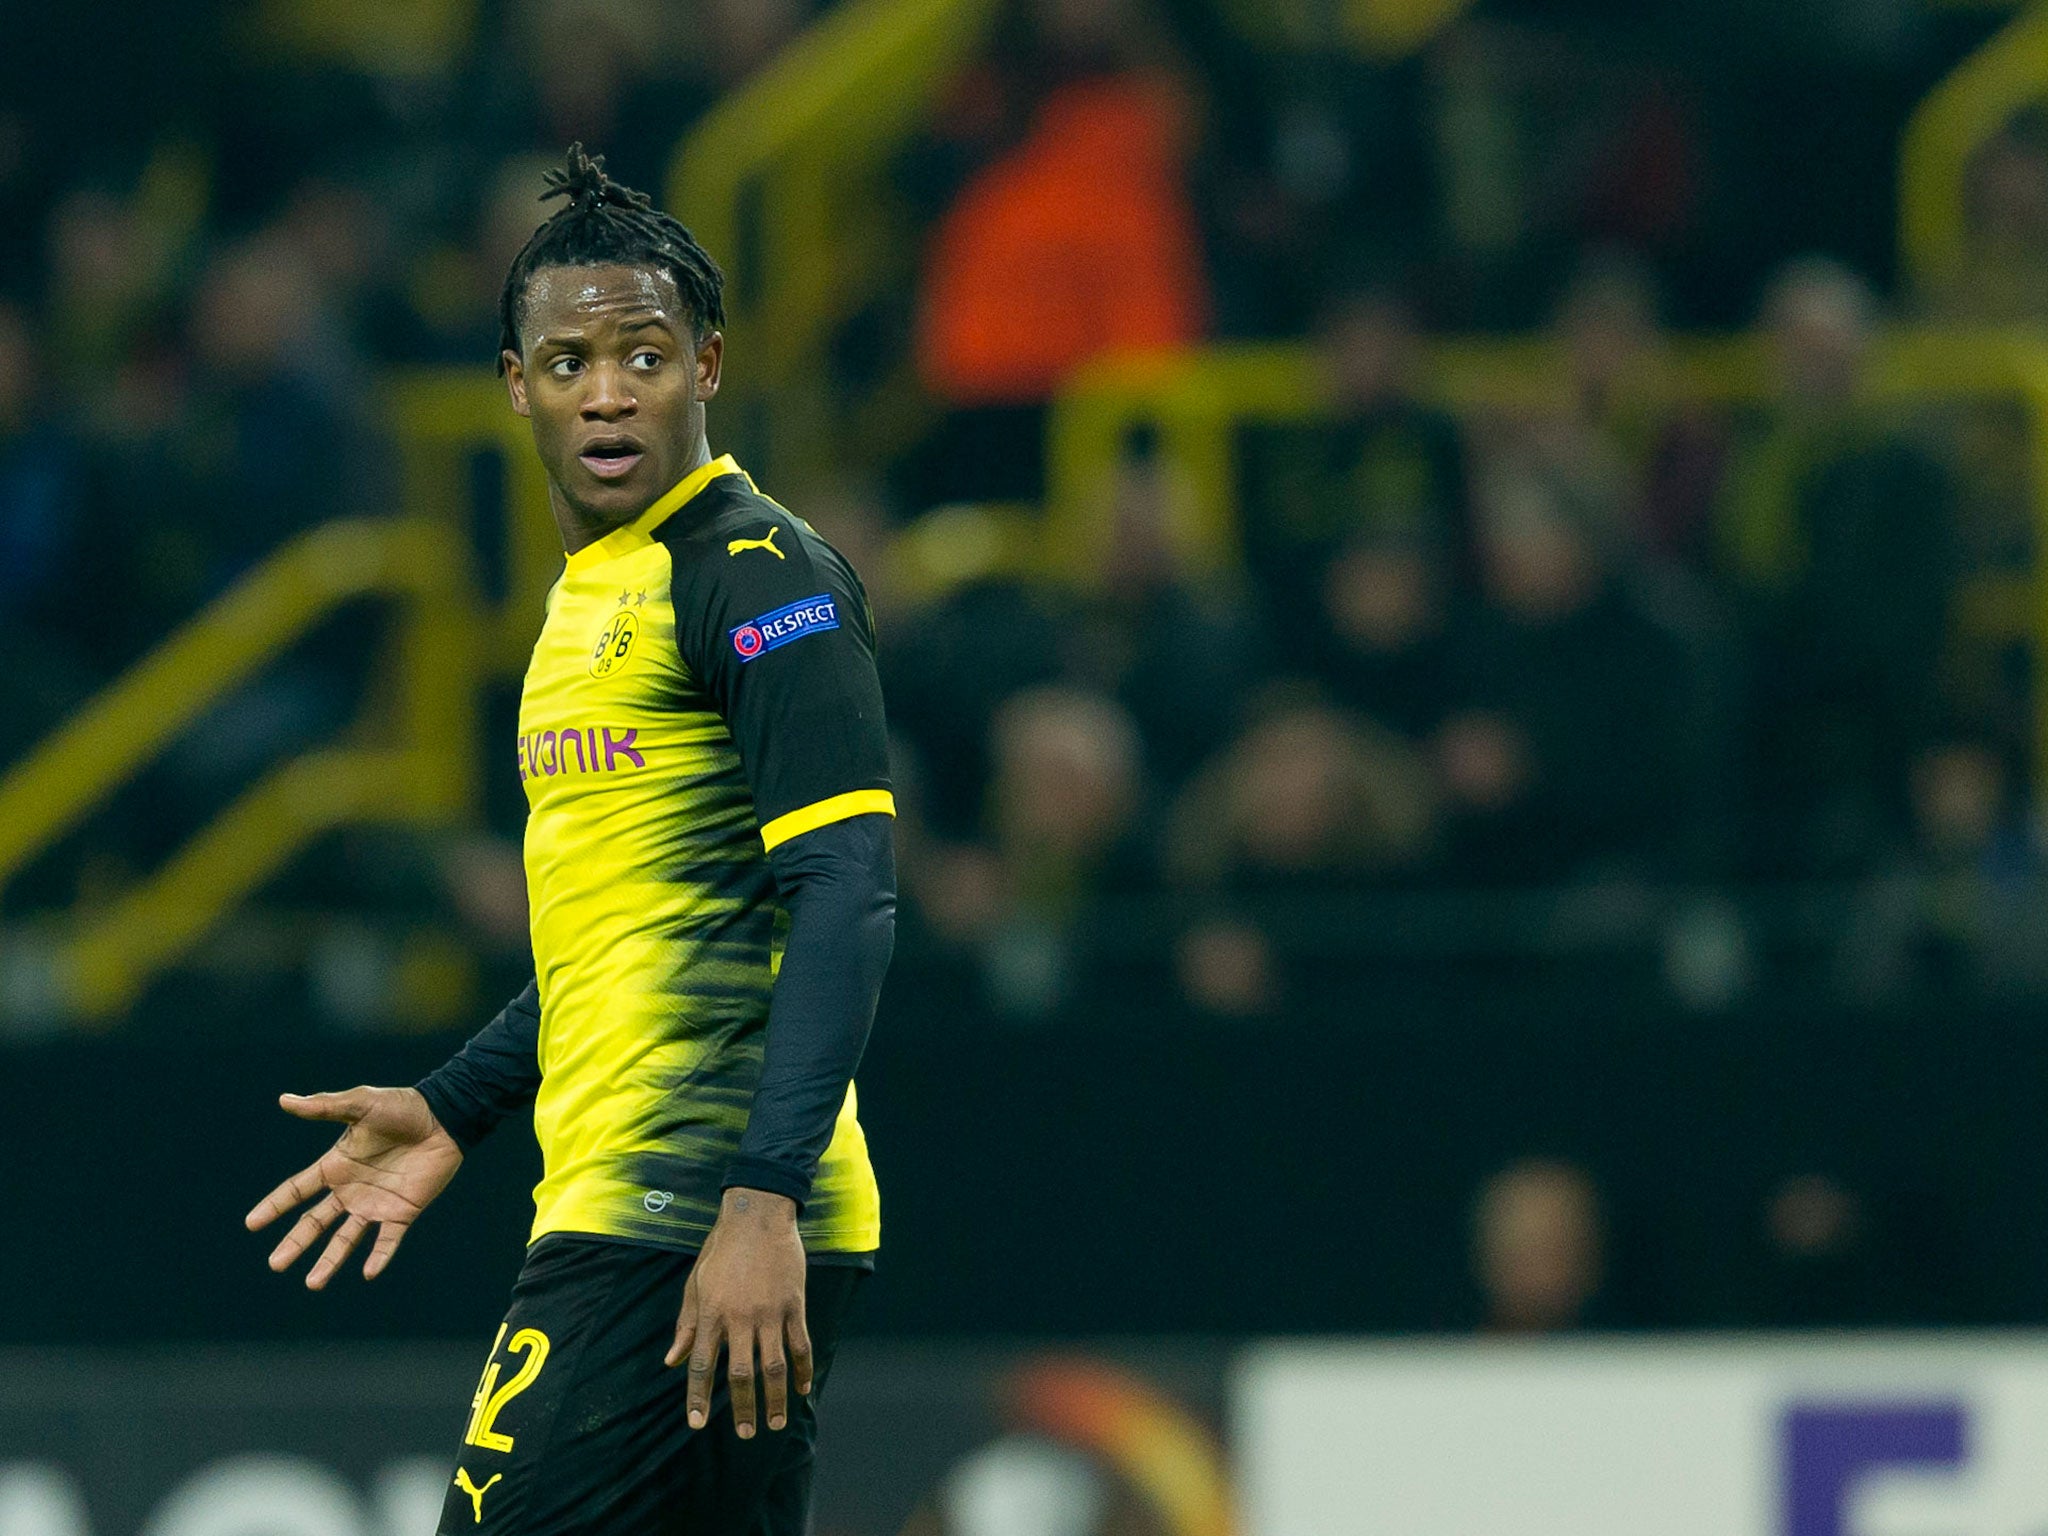 Michy Batshuayi has made a strong start to life in Germany